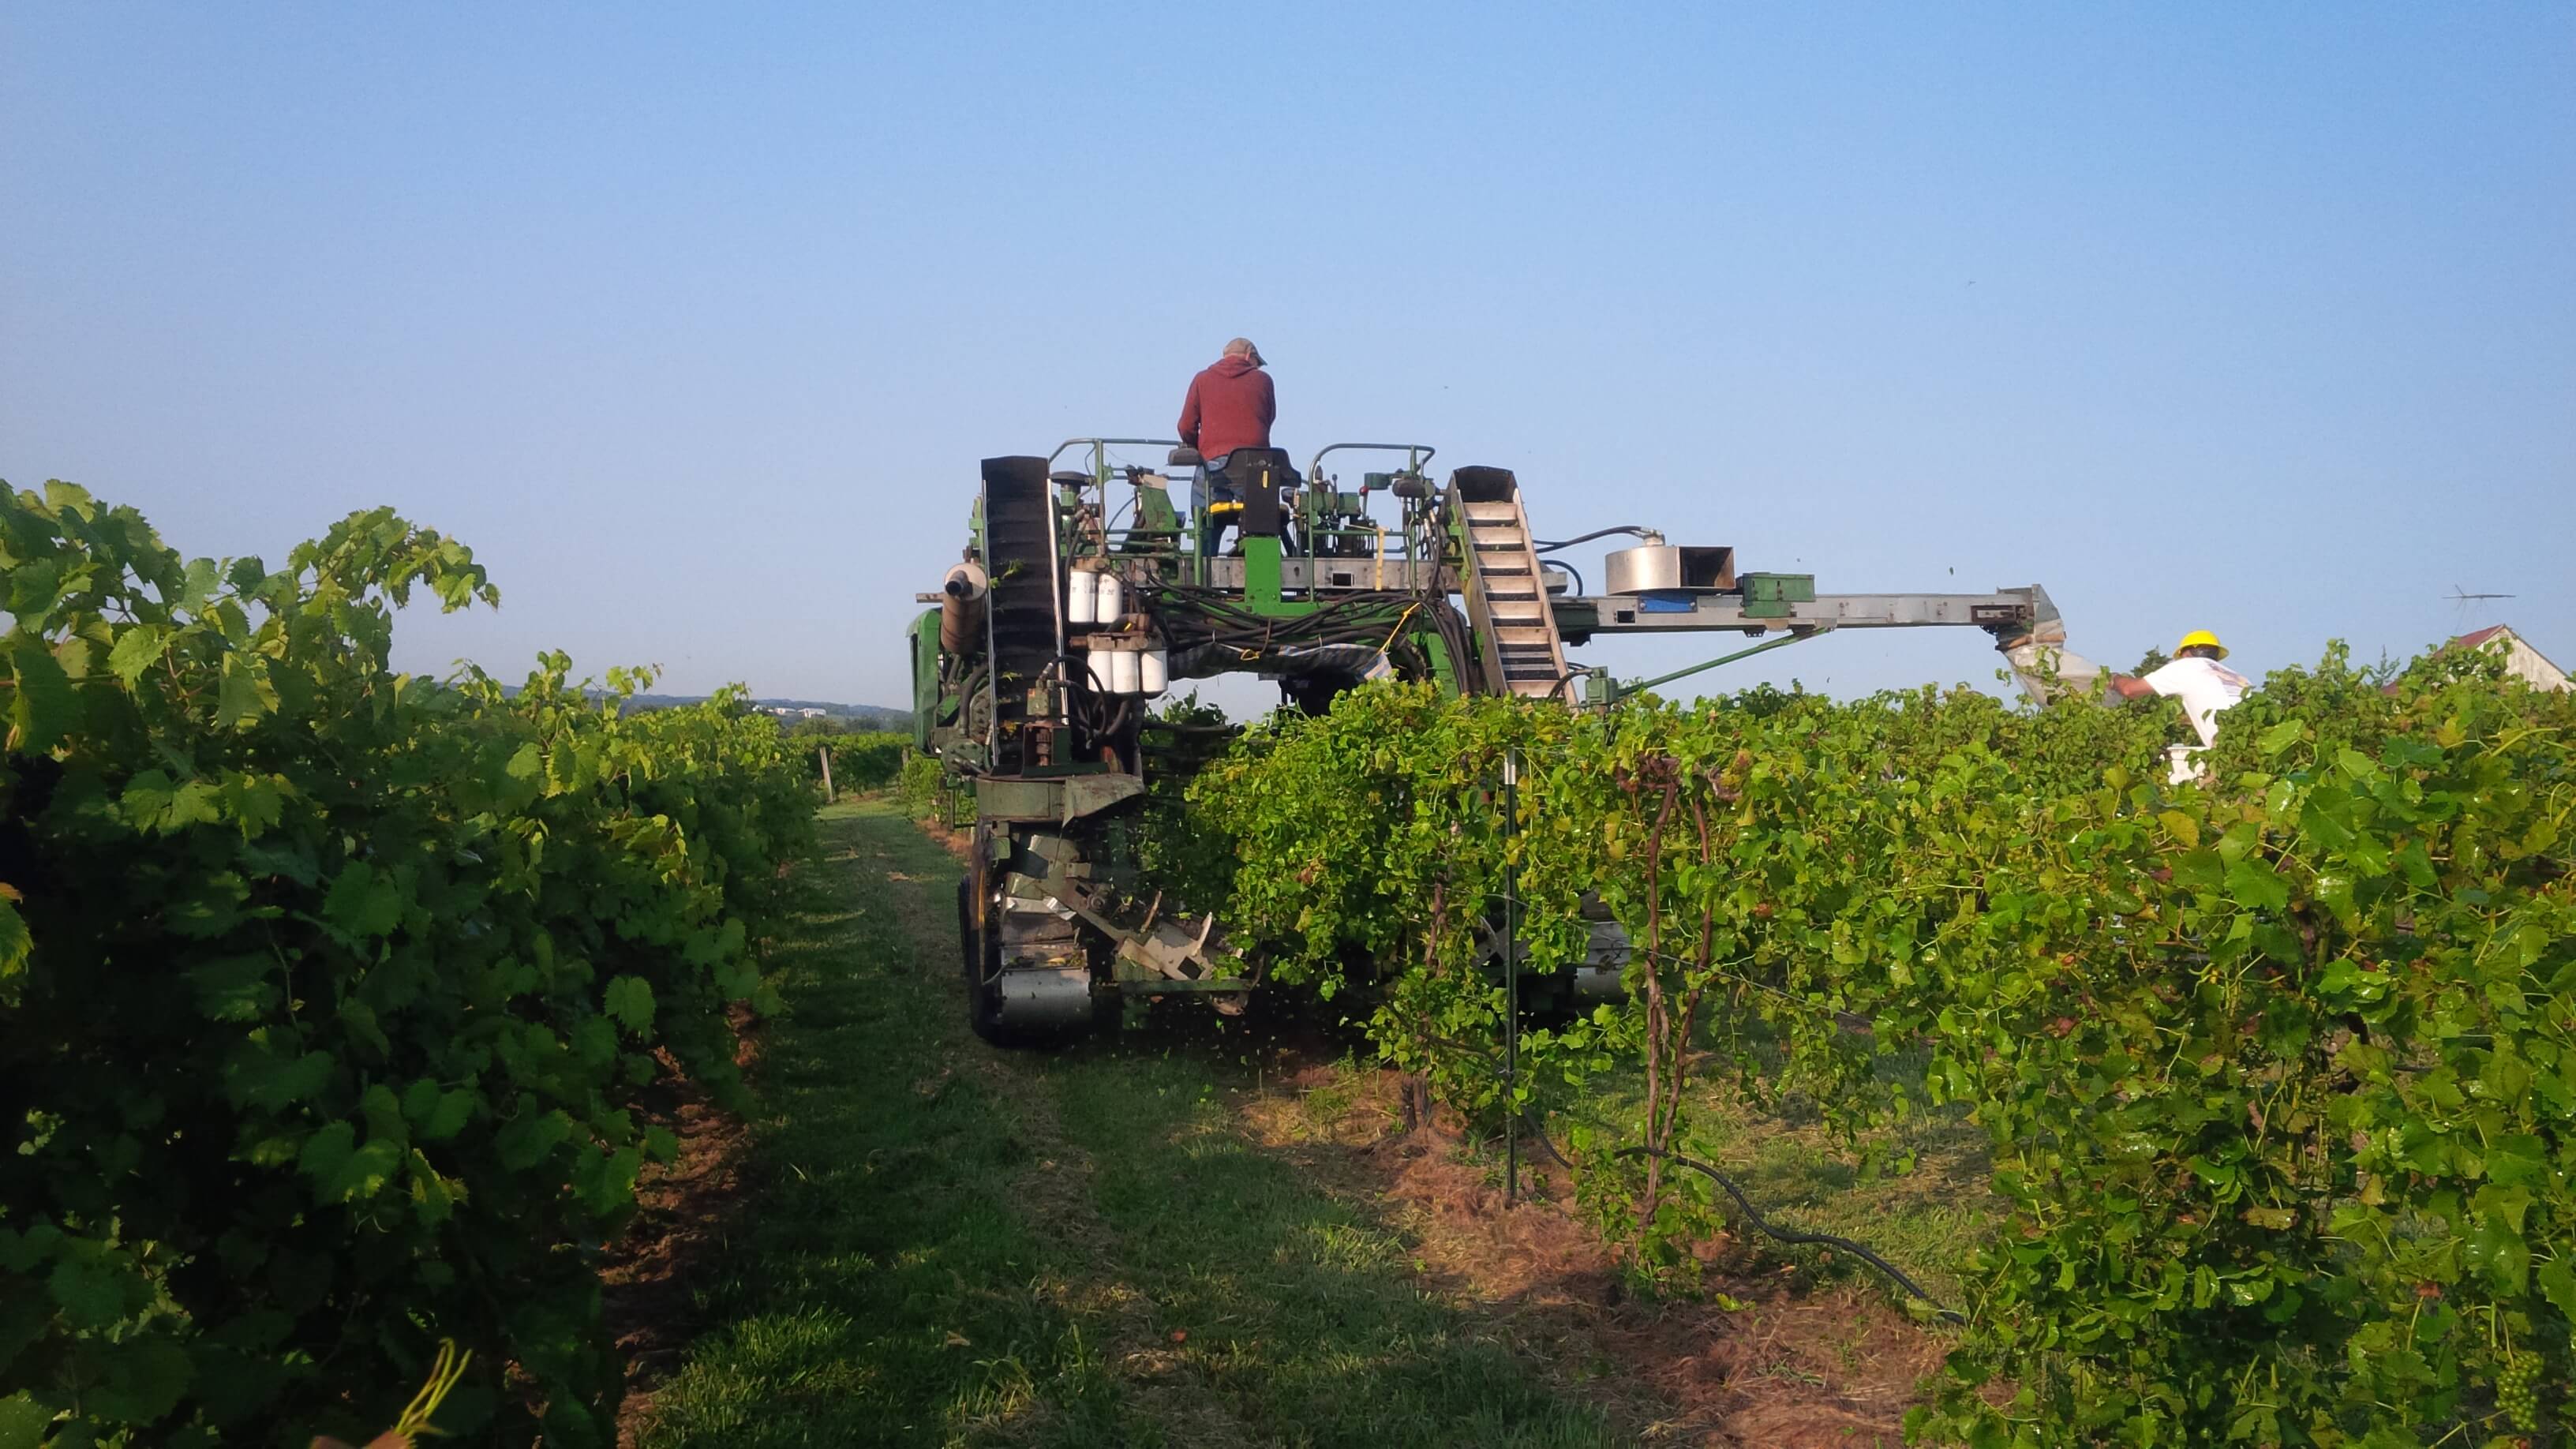 Röbller Vineyard and Winery- A man in a tractor in the grape vine fields.